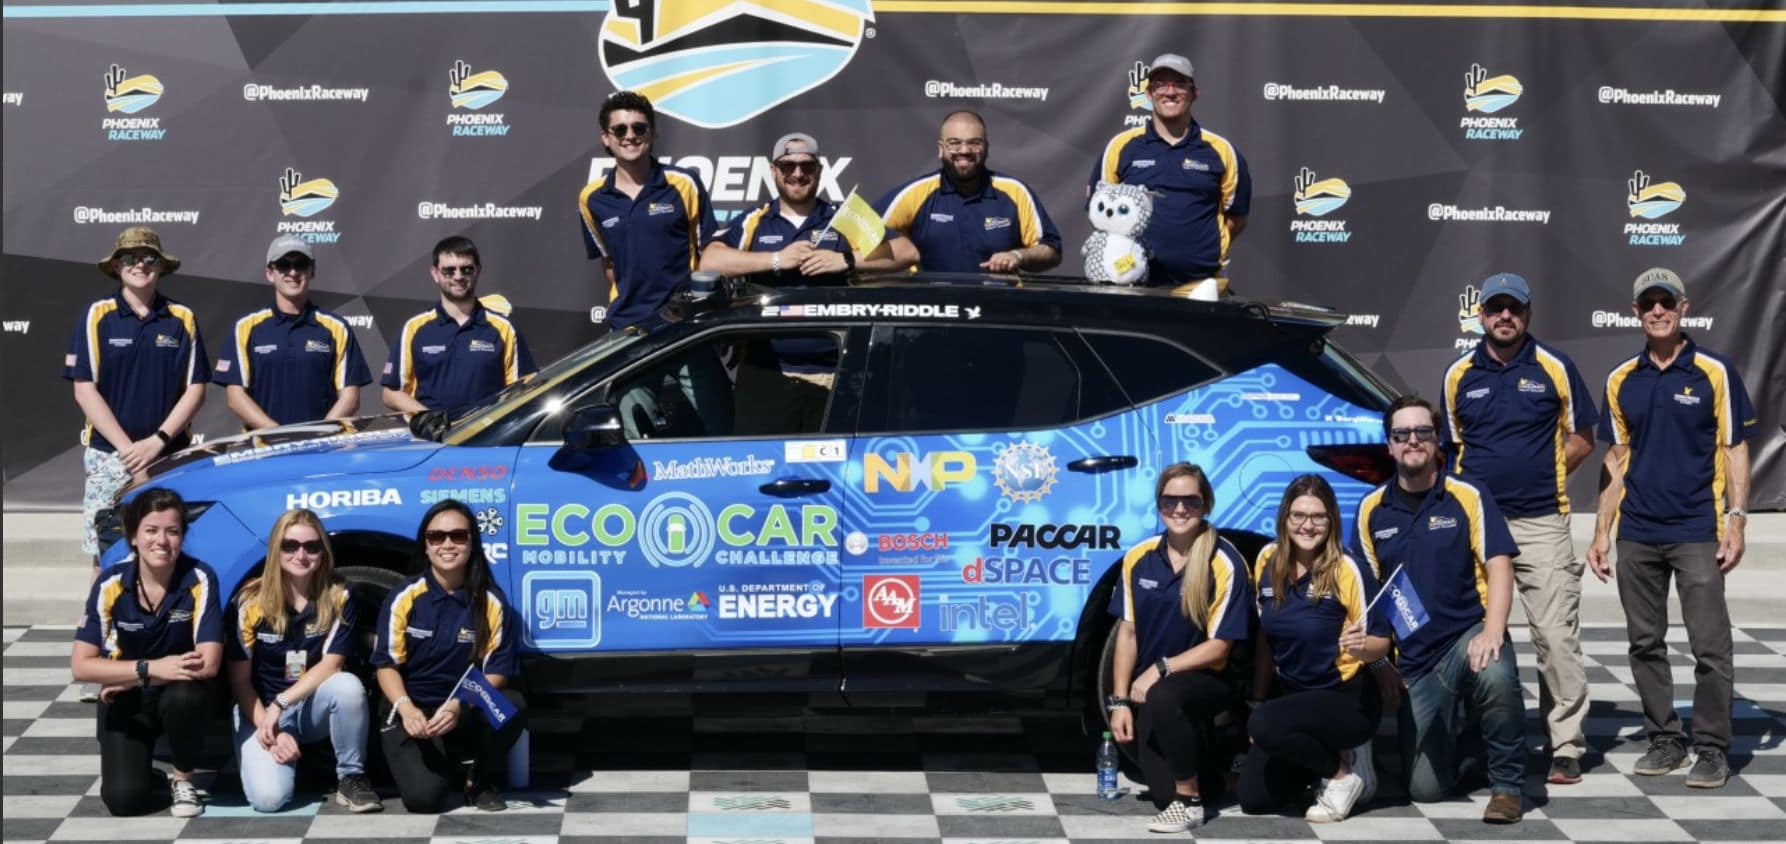 Students in Victory Lane with the EcoCar